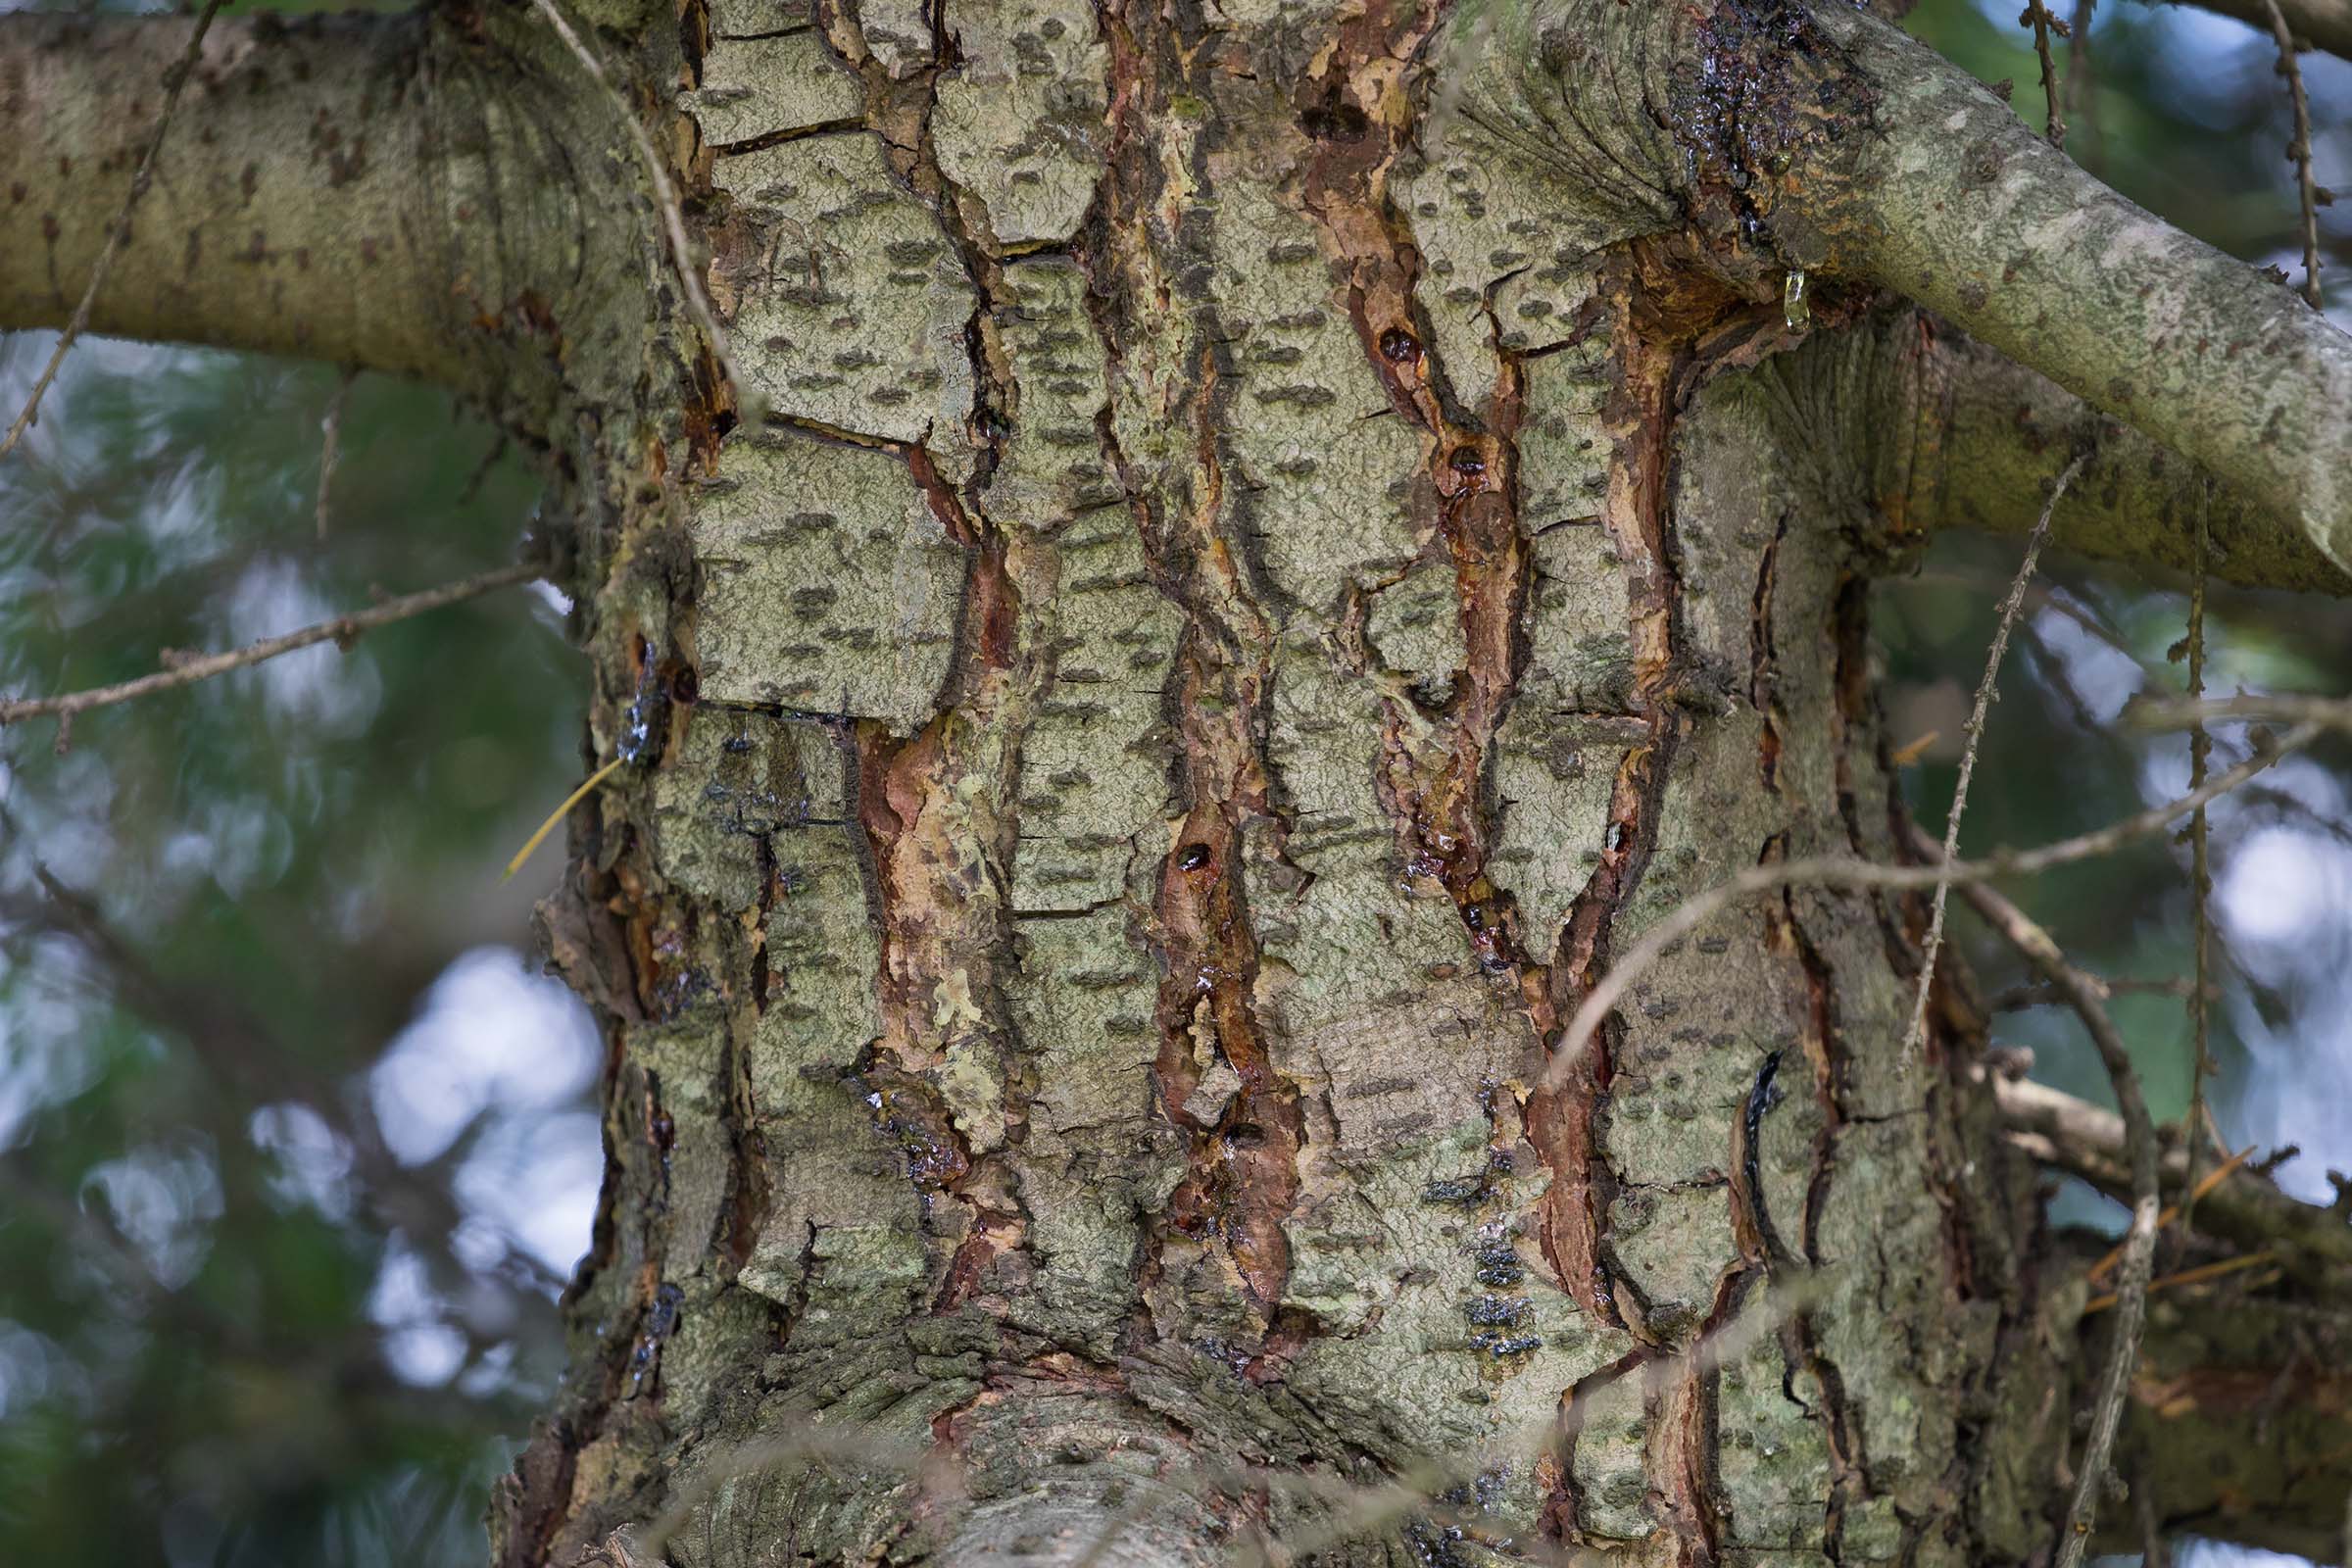 The bark on the deodar cedar is grey with brown ridges throughout the trunk